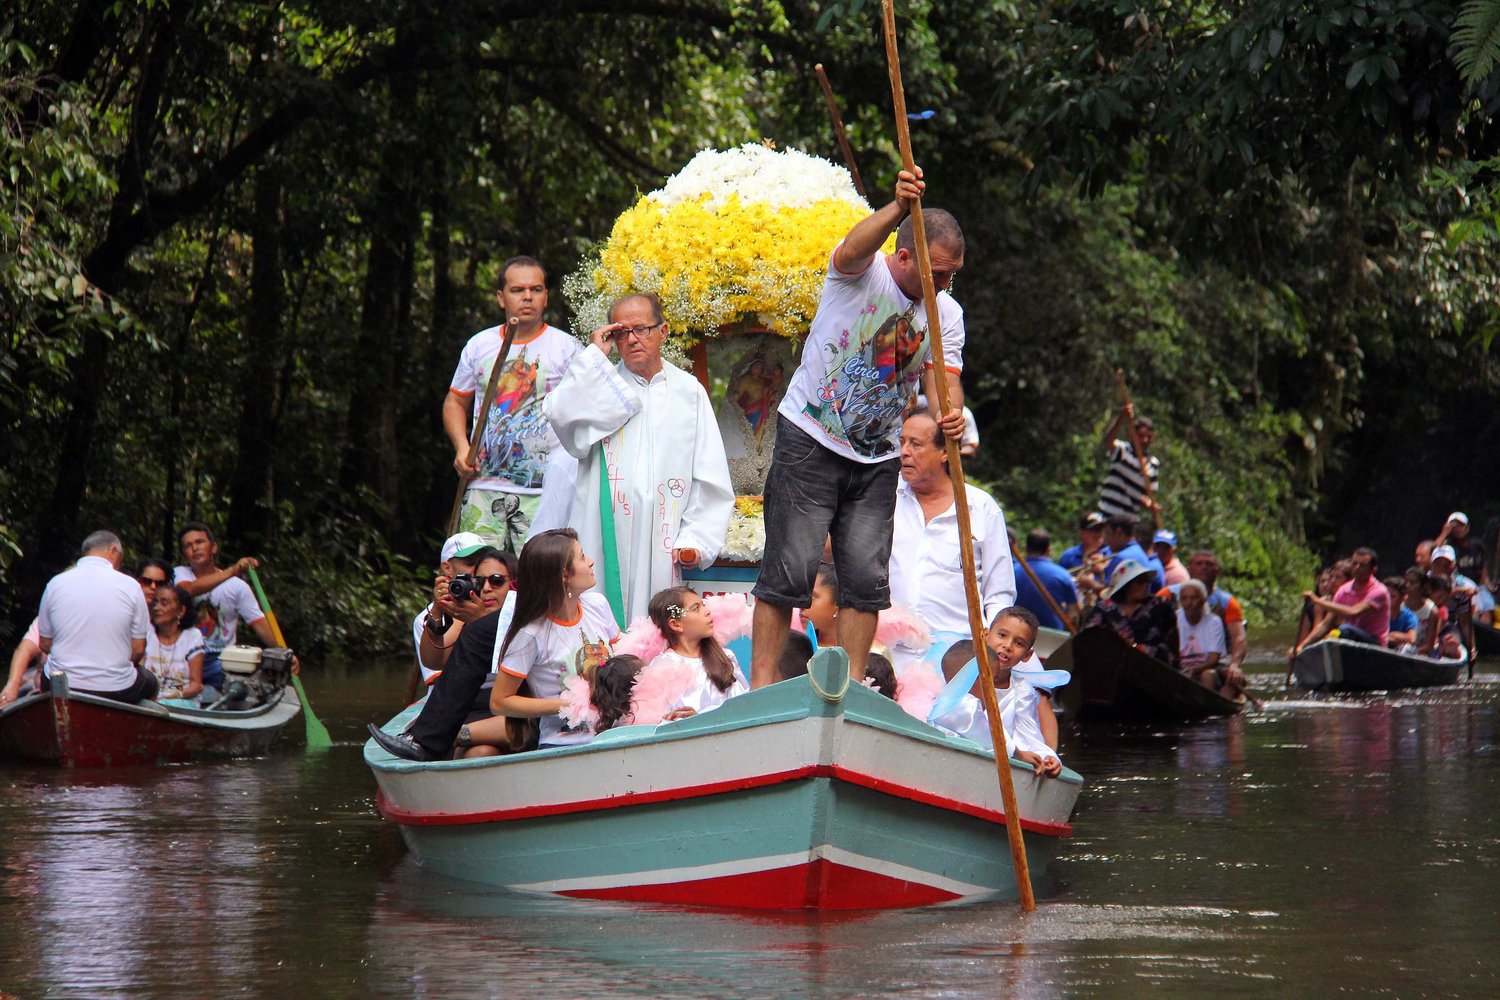 Pilgrims travel in boats as they accompany the statue of Our Lady of Nazareth during an annual river procession and pilgrimage along the Apeu River to a chapel in Macapazinho, Brazil, Aug. 3, 2014. The Vatican released Pope Francis' postsynodal apostolic exhortation, "Querida Amazonia"